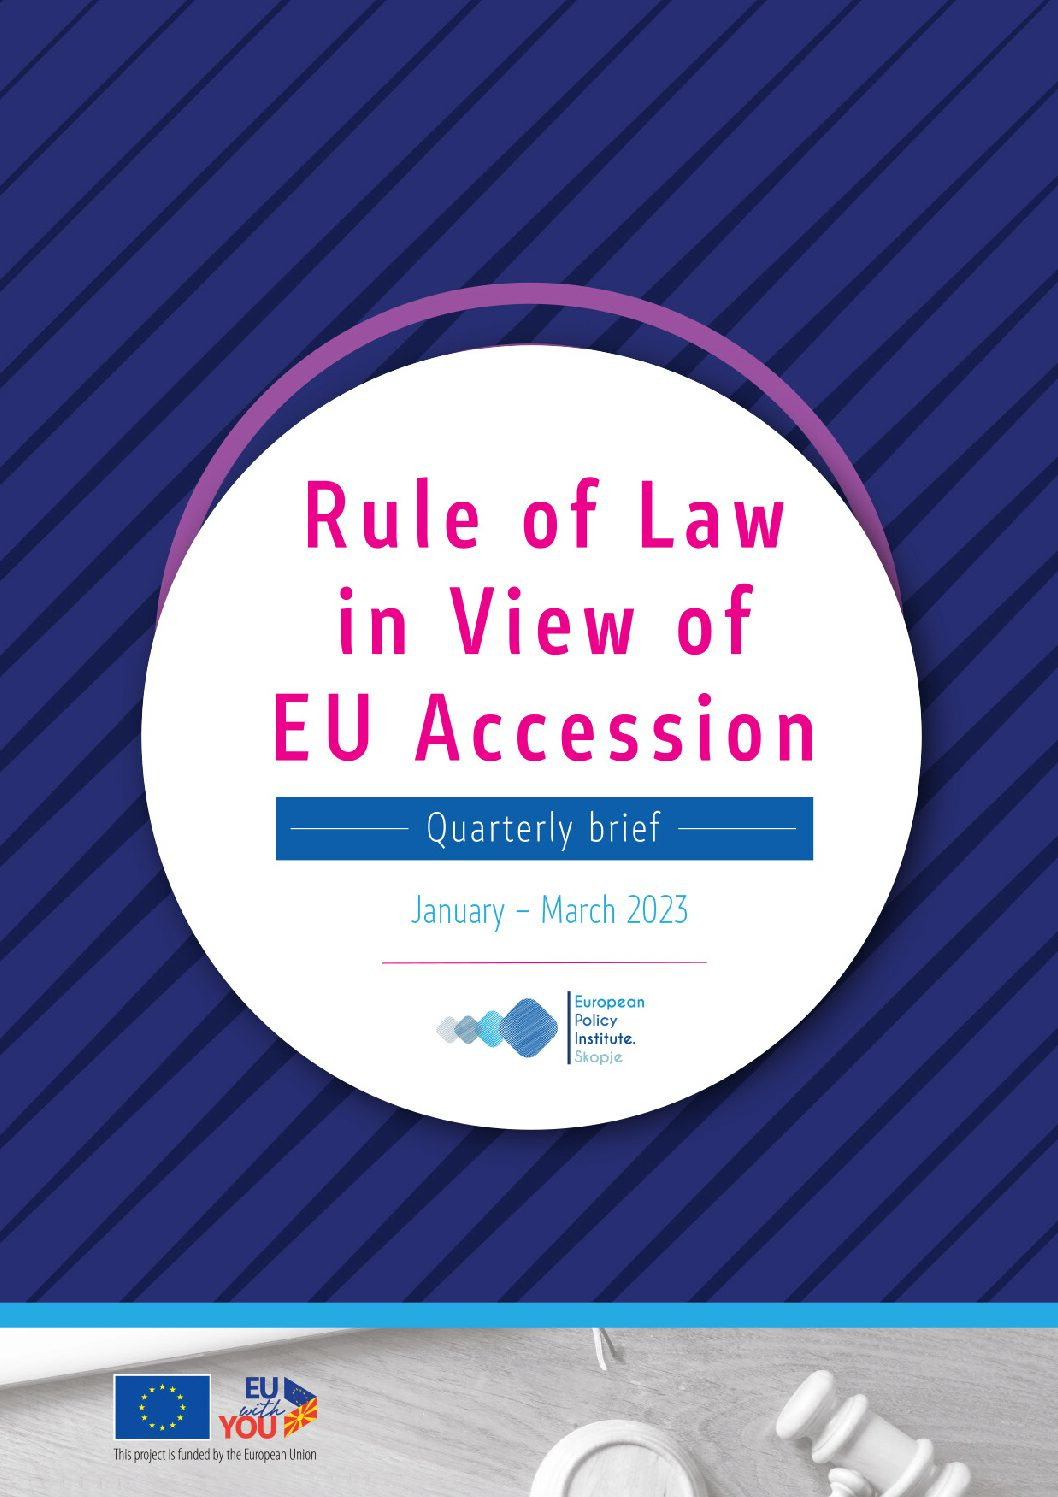 Quarterly brief: Rule of Law in View of EU Accession – January-March 2023